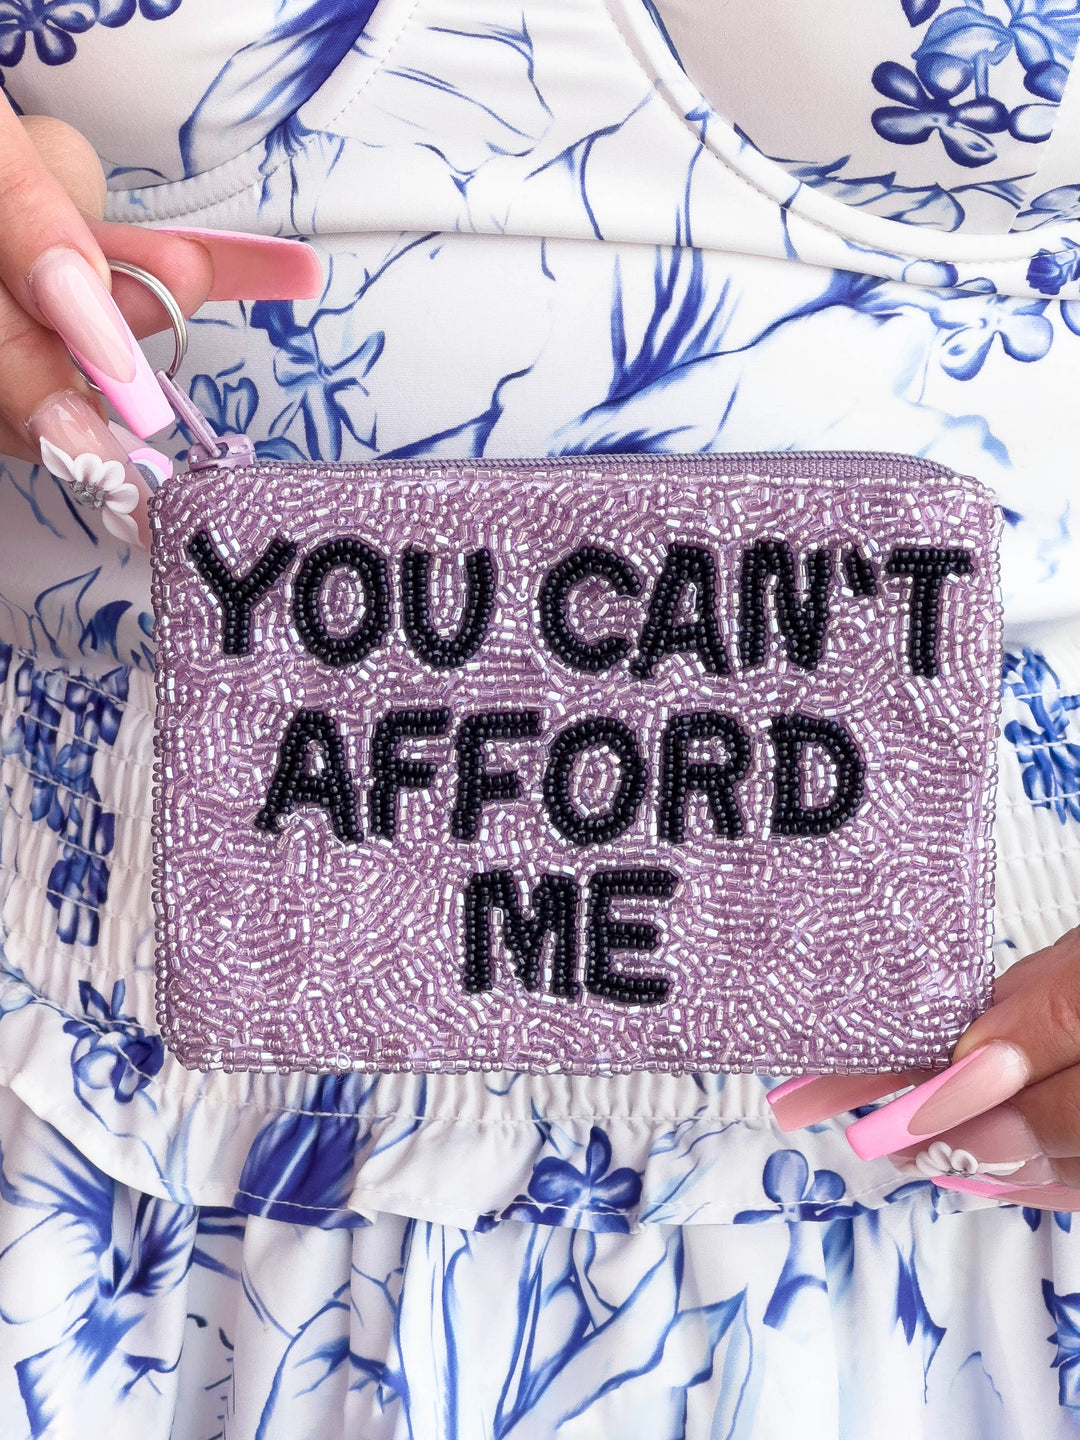 Glamfox - You Can't Afford Me Beaded Coin Purse [Ready to Ship]